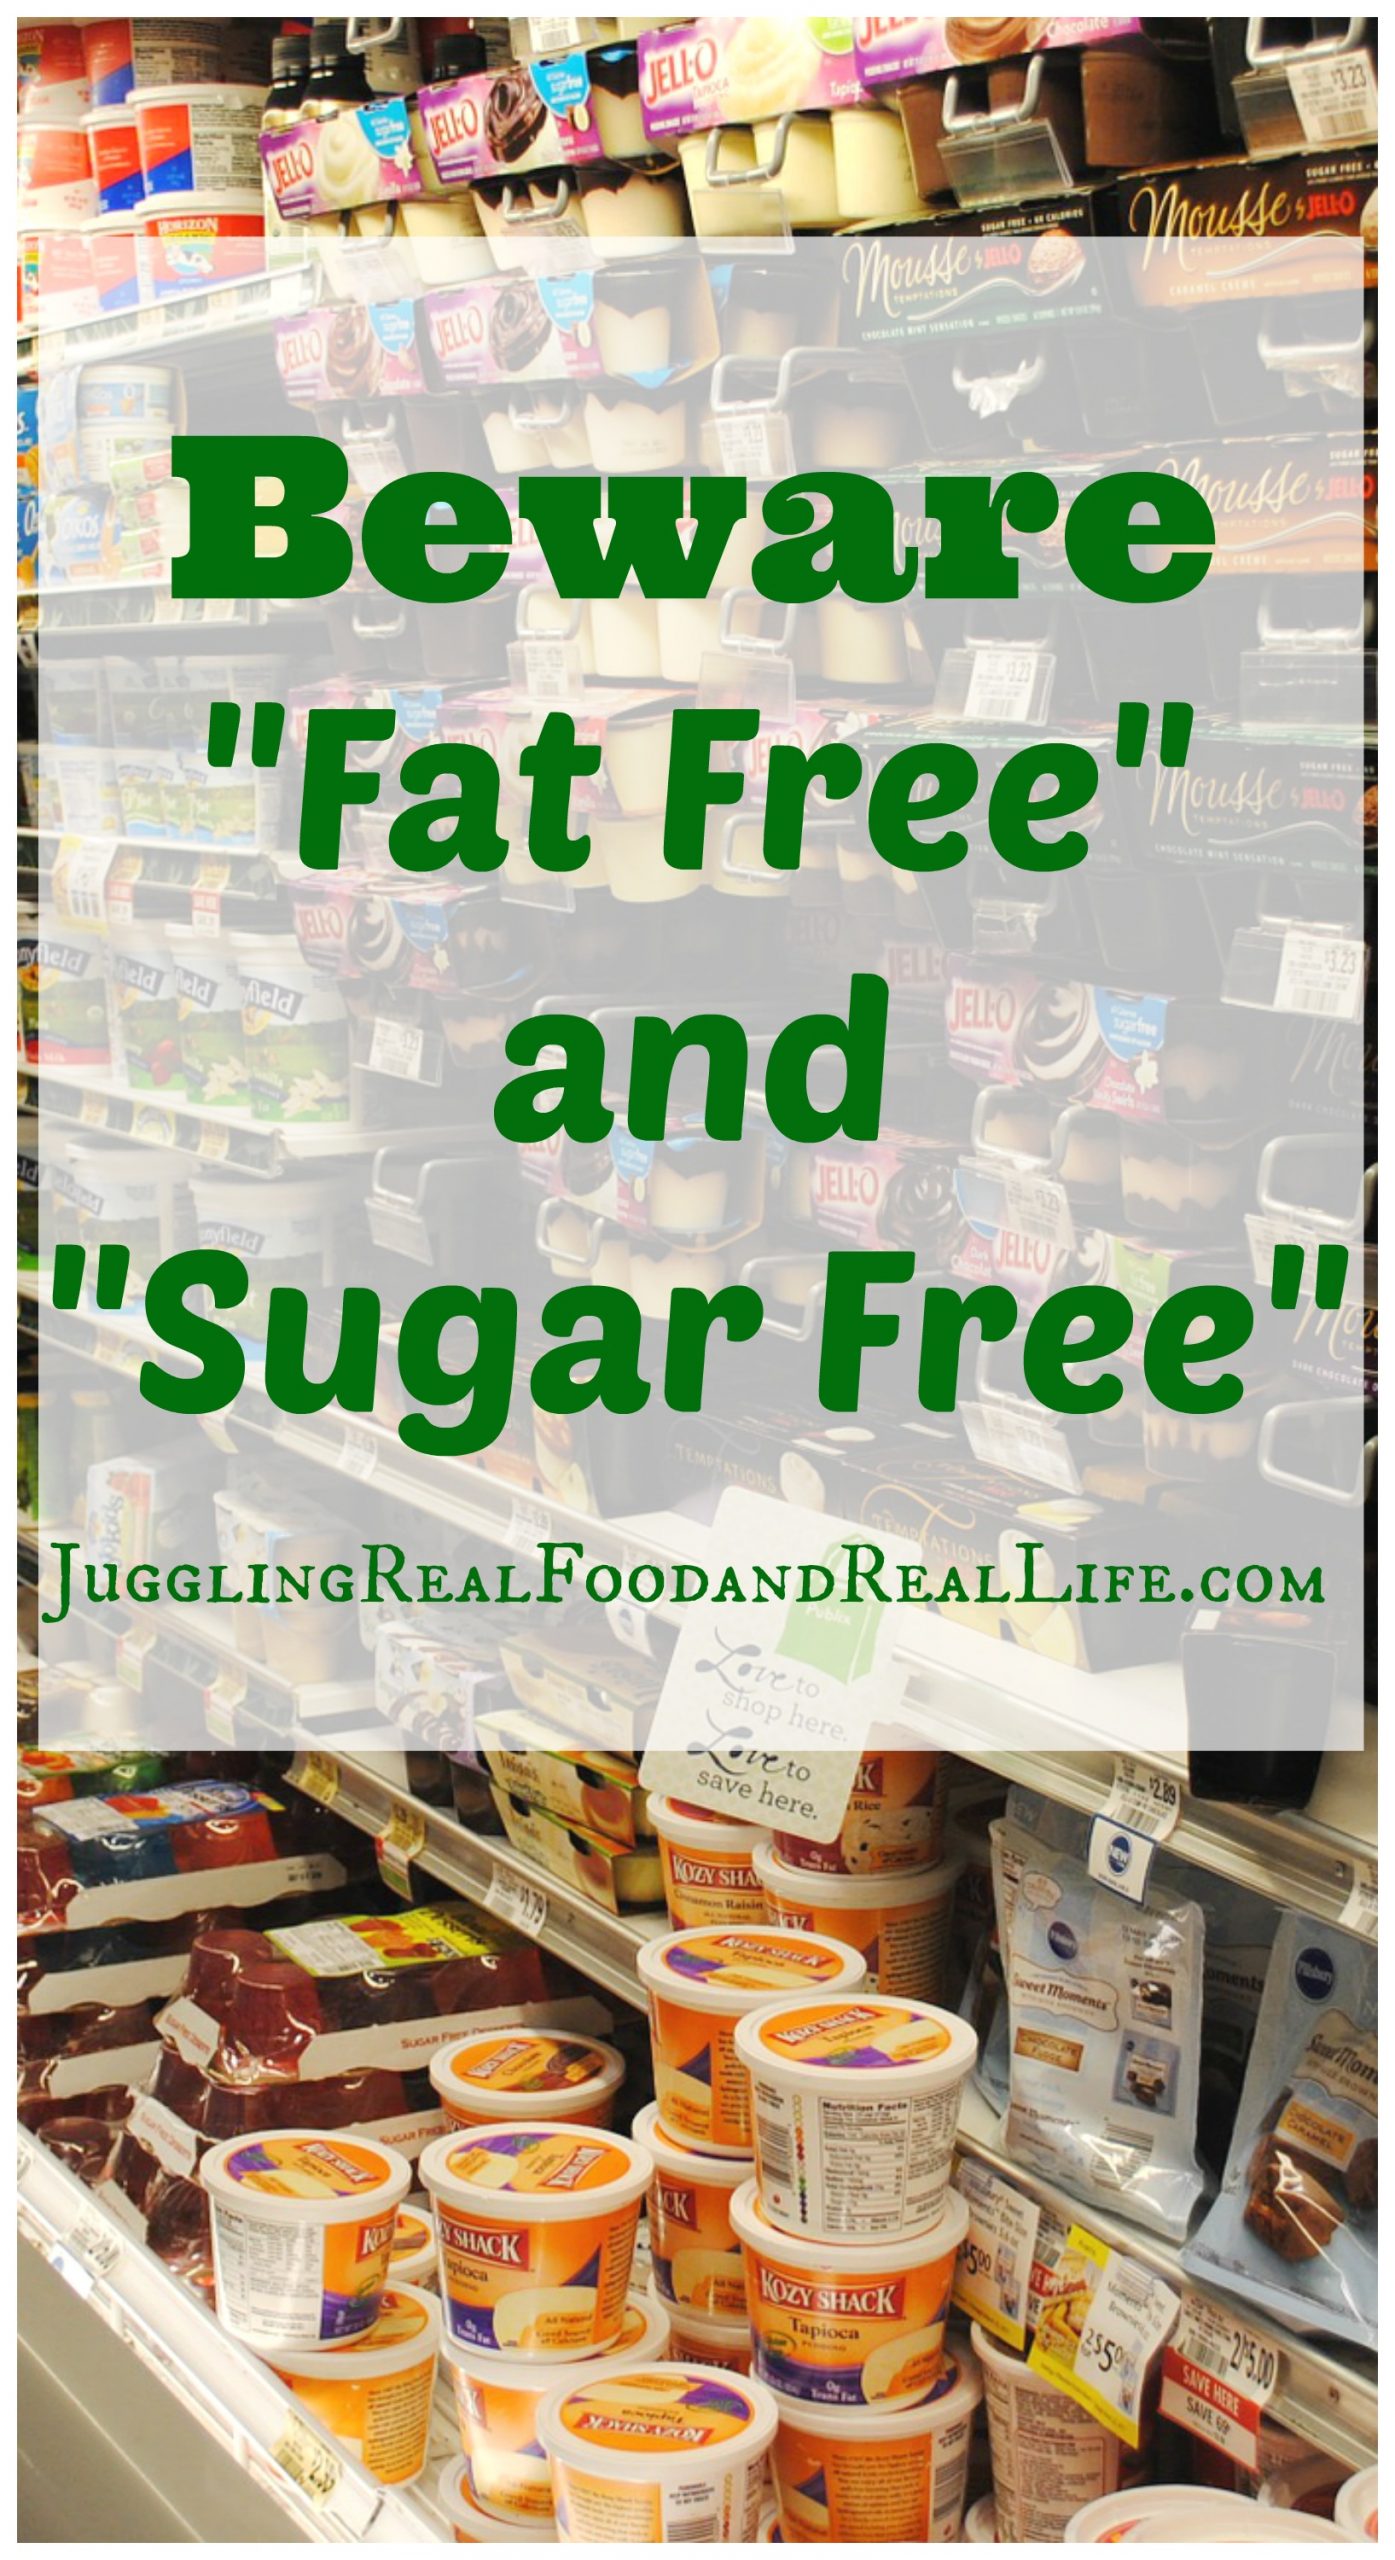 The Real Food Experience Challenge: Beware of “Low Fat” and “Sugar Free” Processed Foods